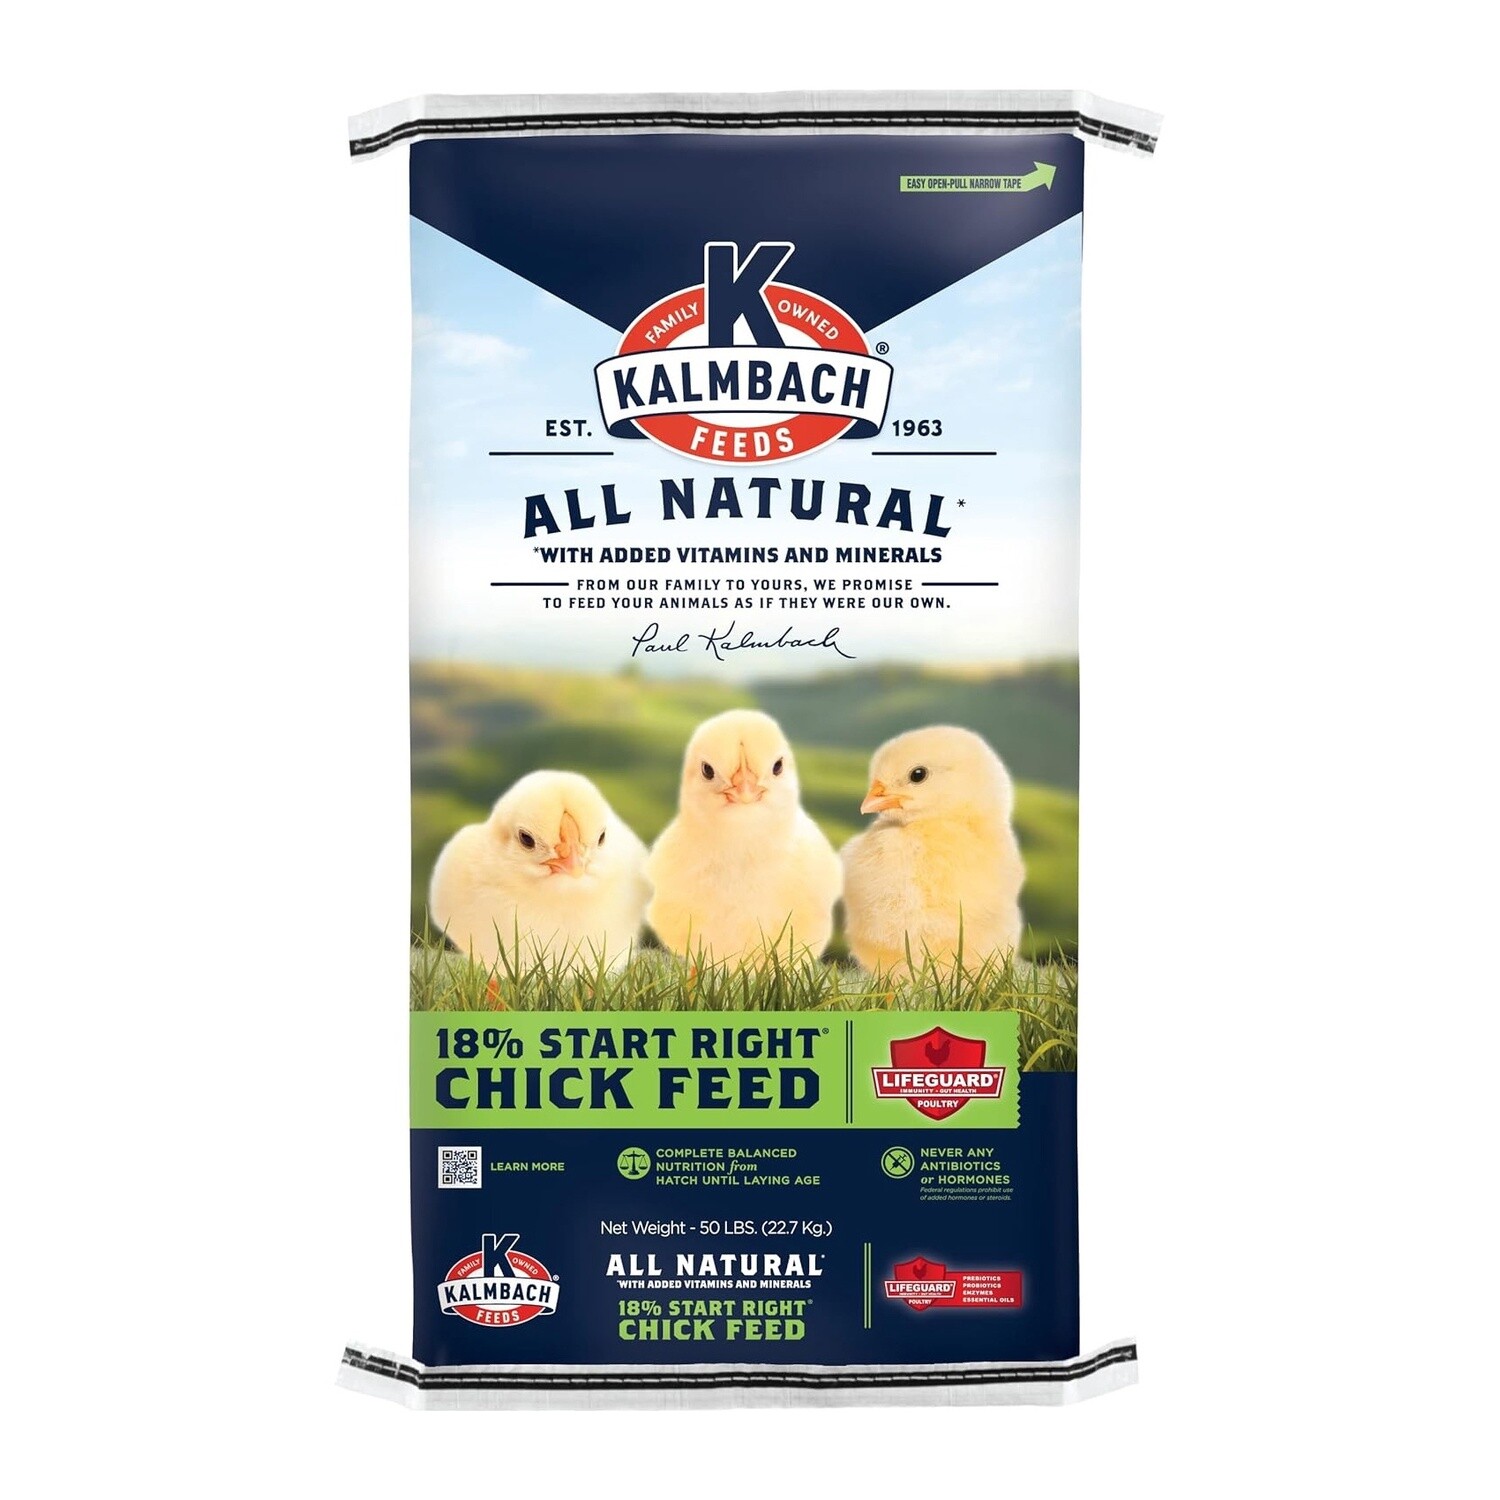 Kalmbach 18% Start Right® Chick Feed 50 lb